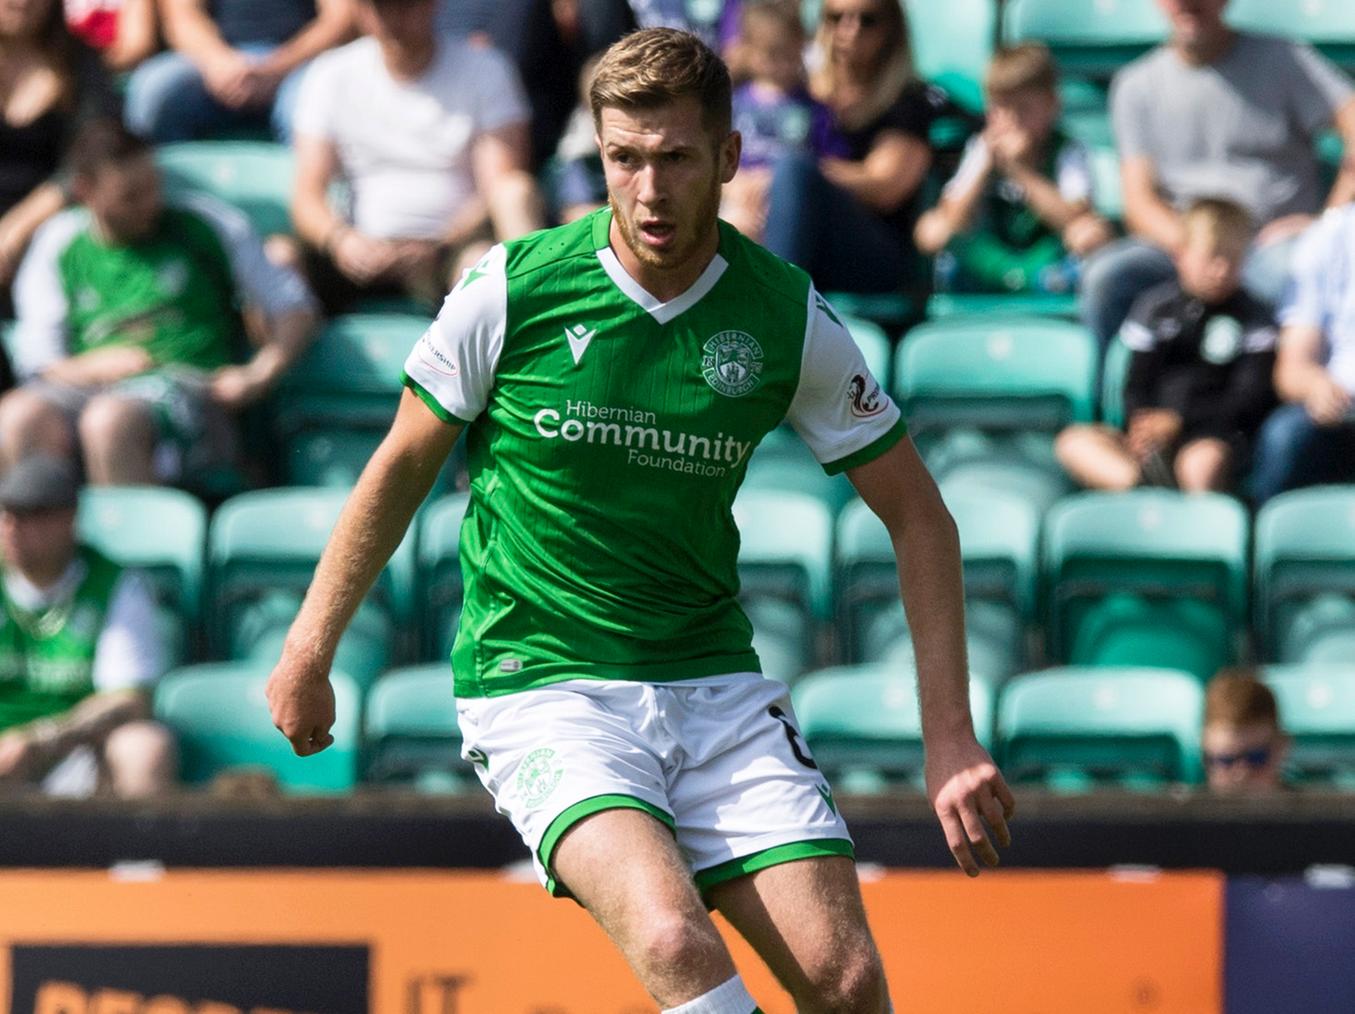 His best game as a Hibs player. The former Bolton midfielder battled hard in the centre. He also took up good positions to give his teammates options in possession and rarely wasted a pass. 8